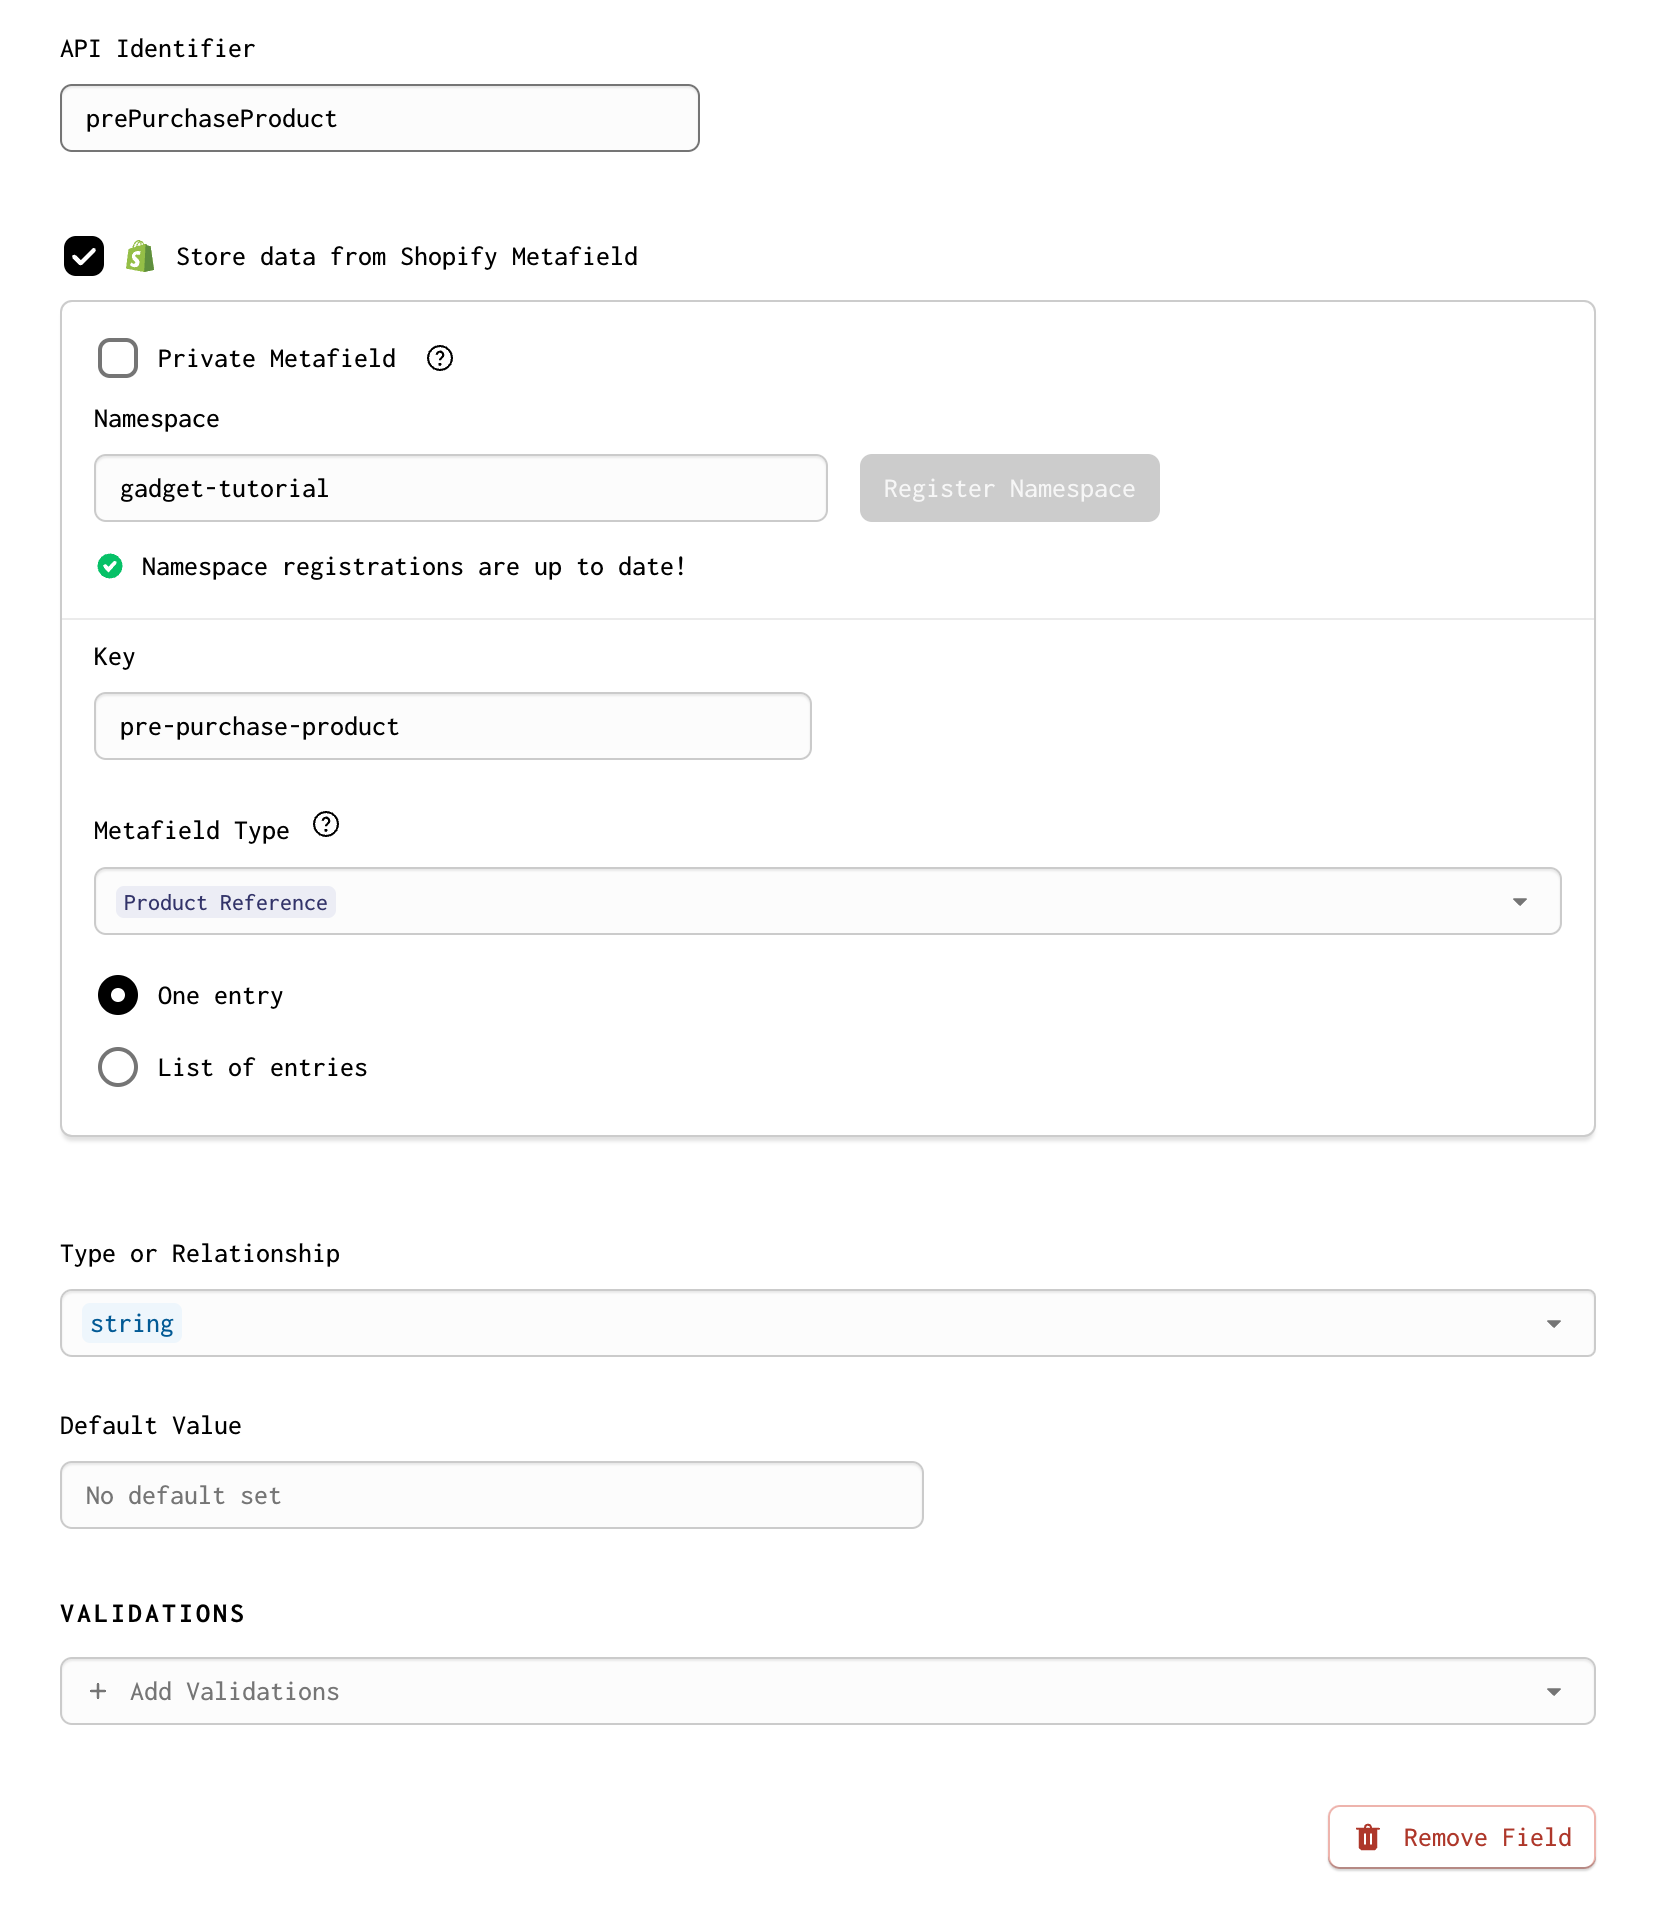 Screenshot of the new Pre-Purchase Product field on the shopifyShop model. The field stores data from a Shopify Metafield, and has the namespace 'gadget-tutorial', and the key 'pre-purchase-product'